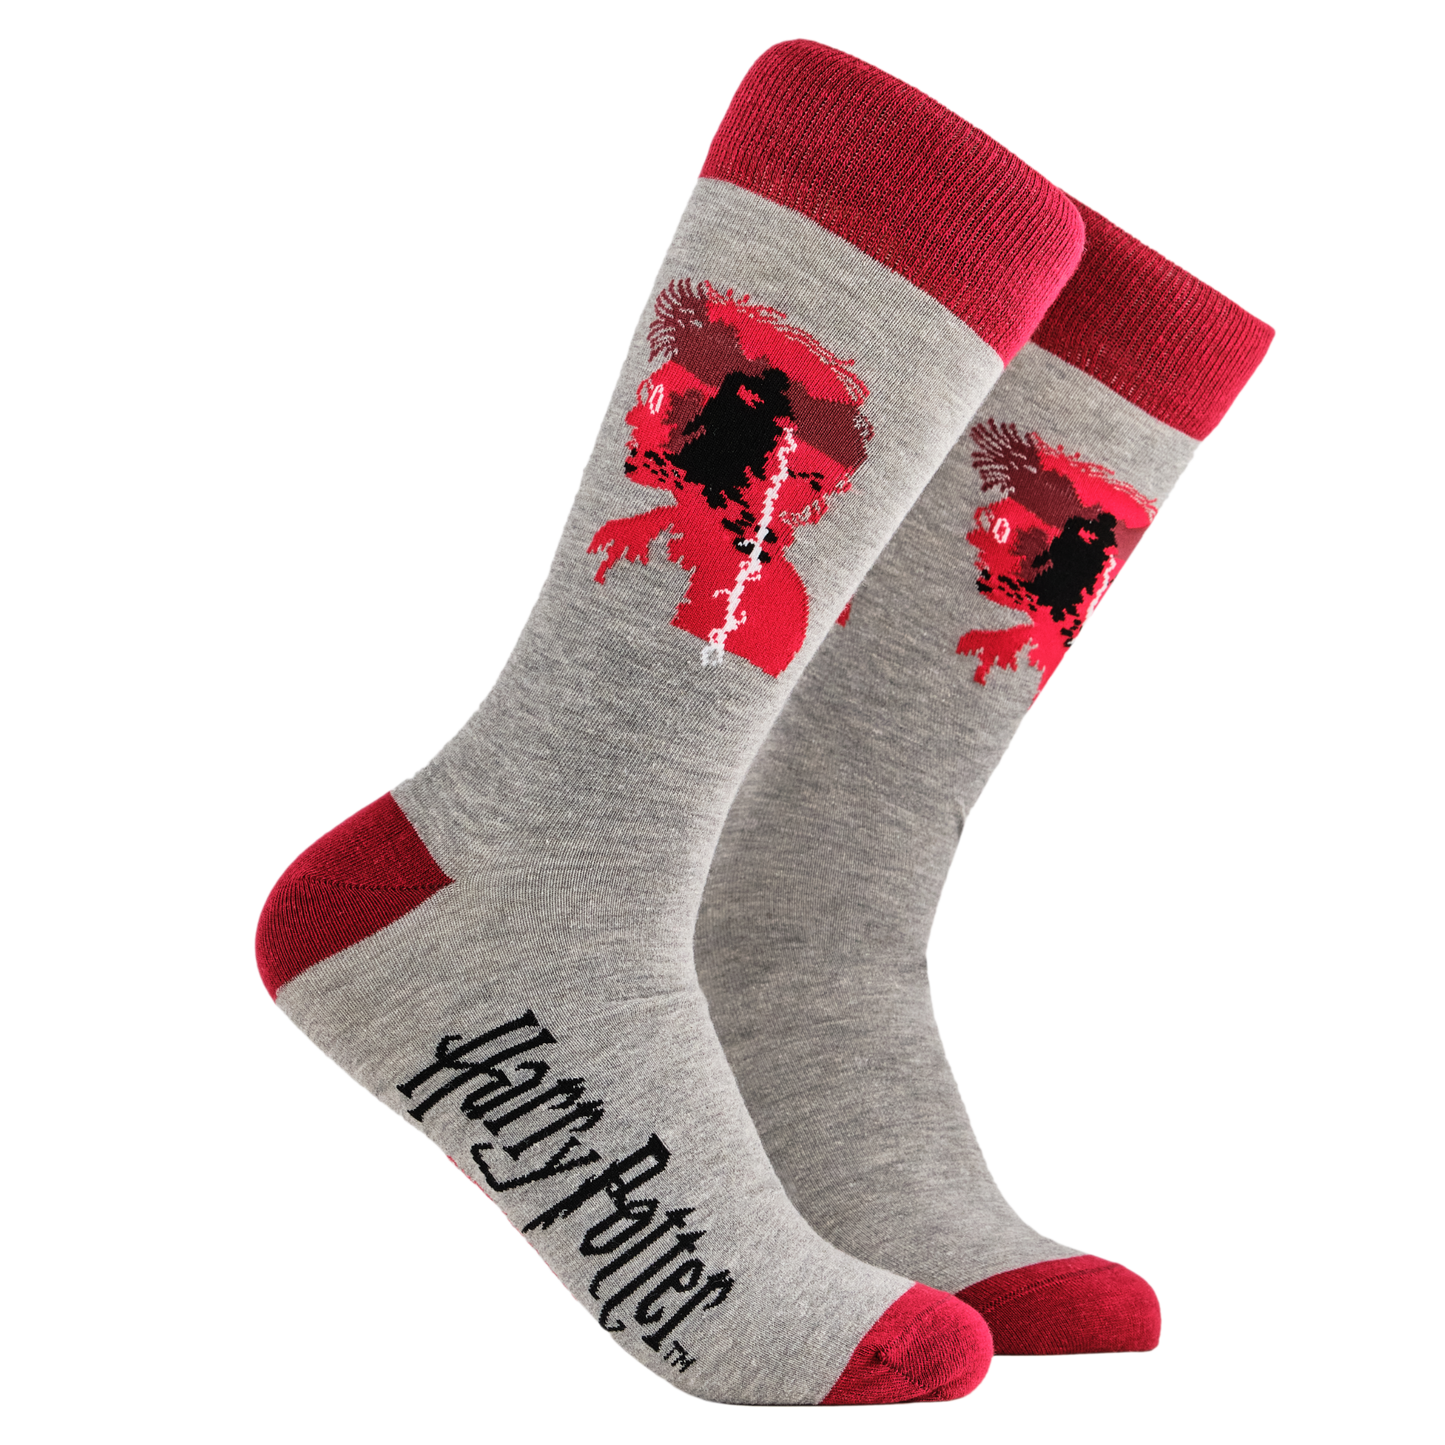 Harry Potter Socks - The Dark Lord. A pair of socks depicting Lord Voldermort. Grey legs, red cuff, heel and toe.